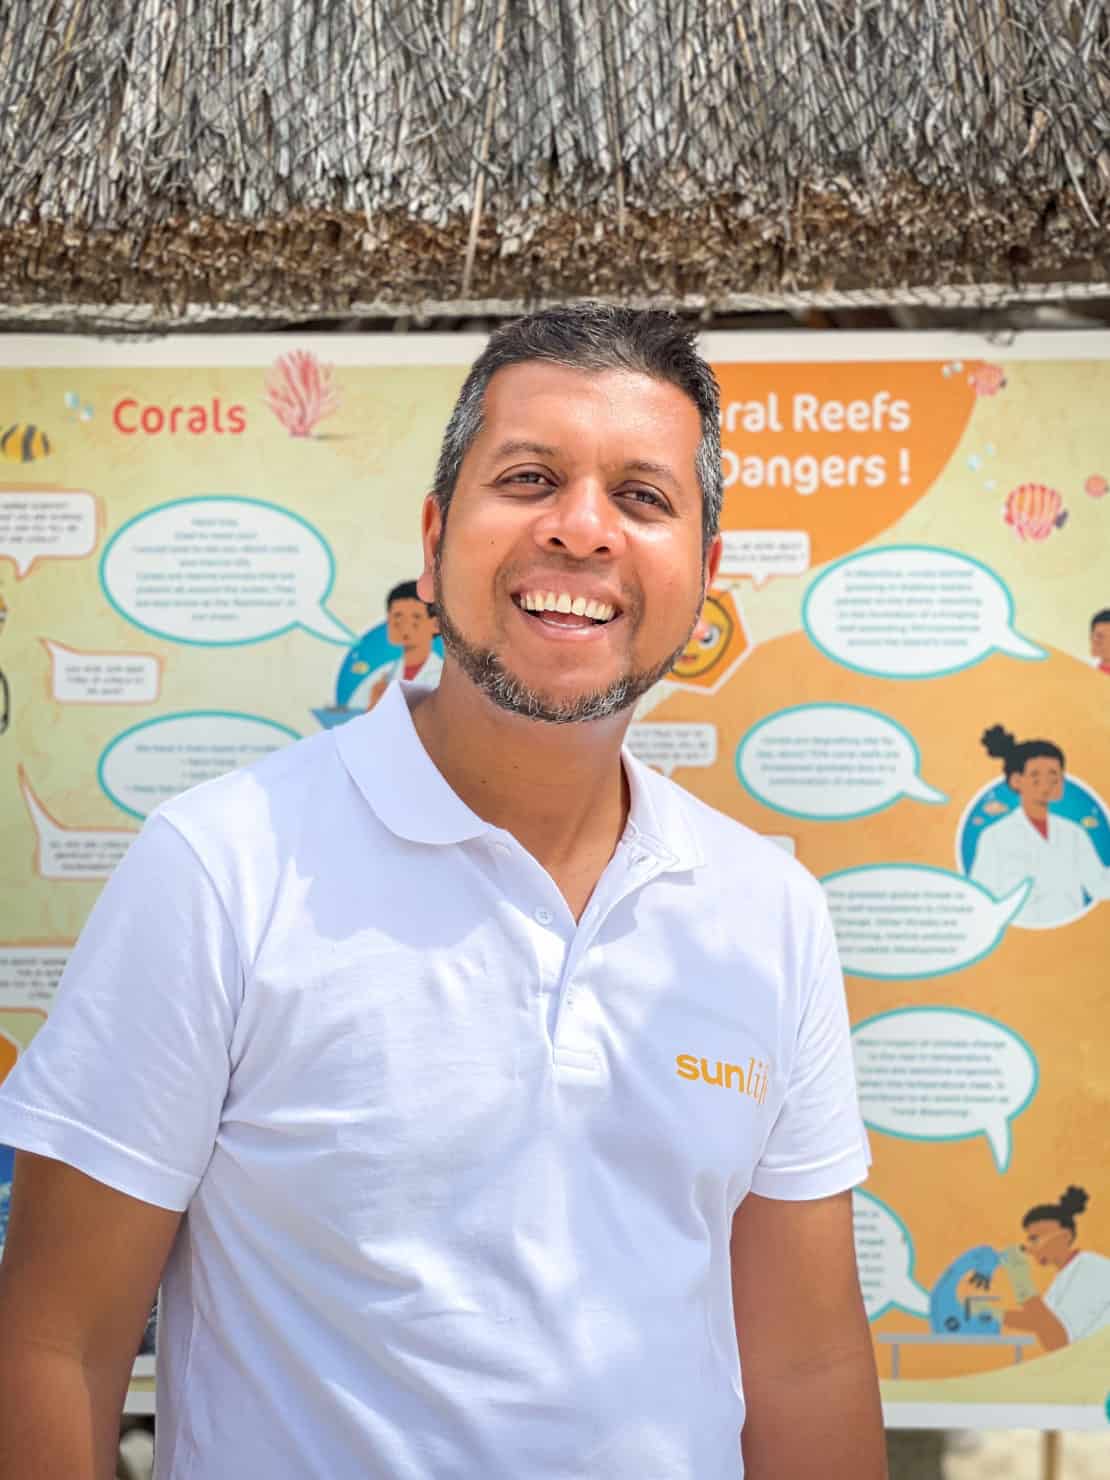 Portrait of Ali Abdool Sustainability Manager at Sunlife in front of the coral regeneration project poster